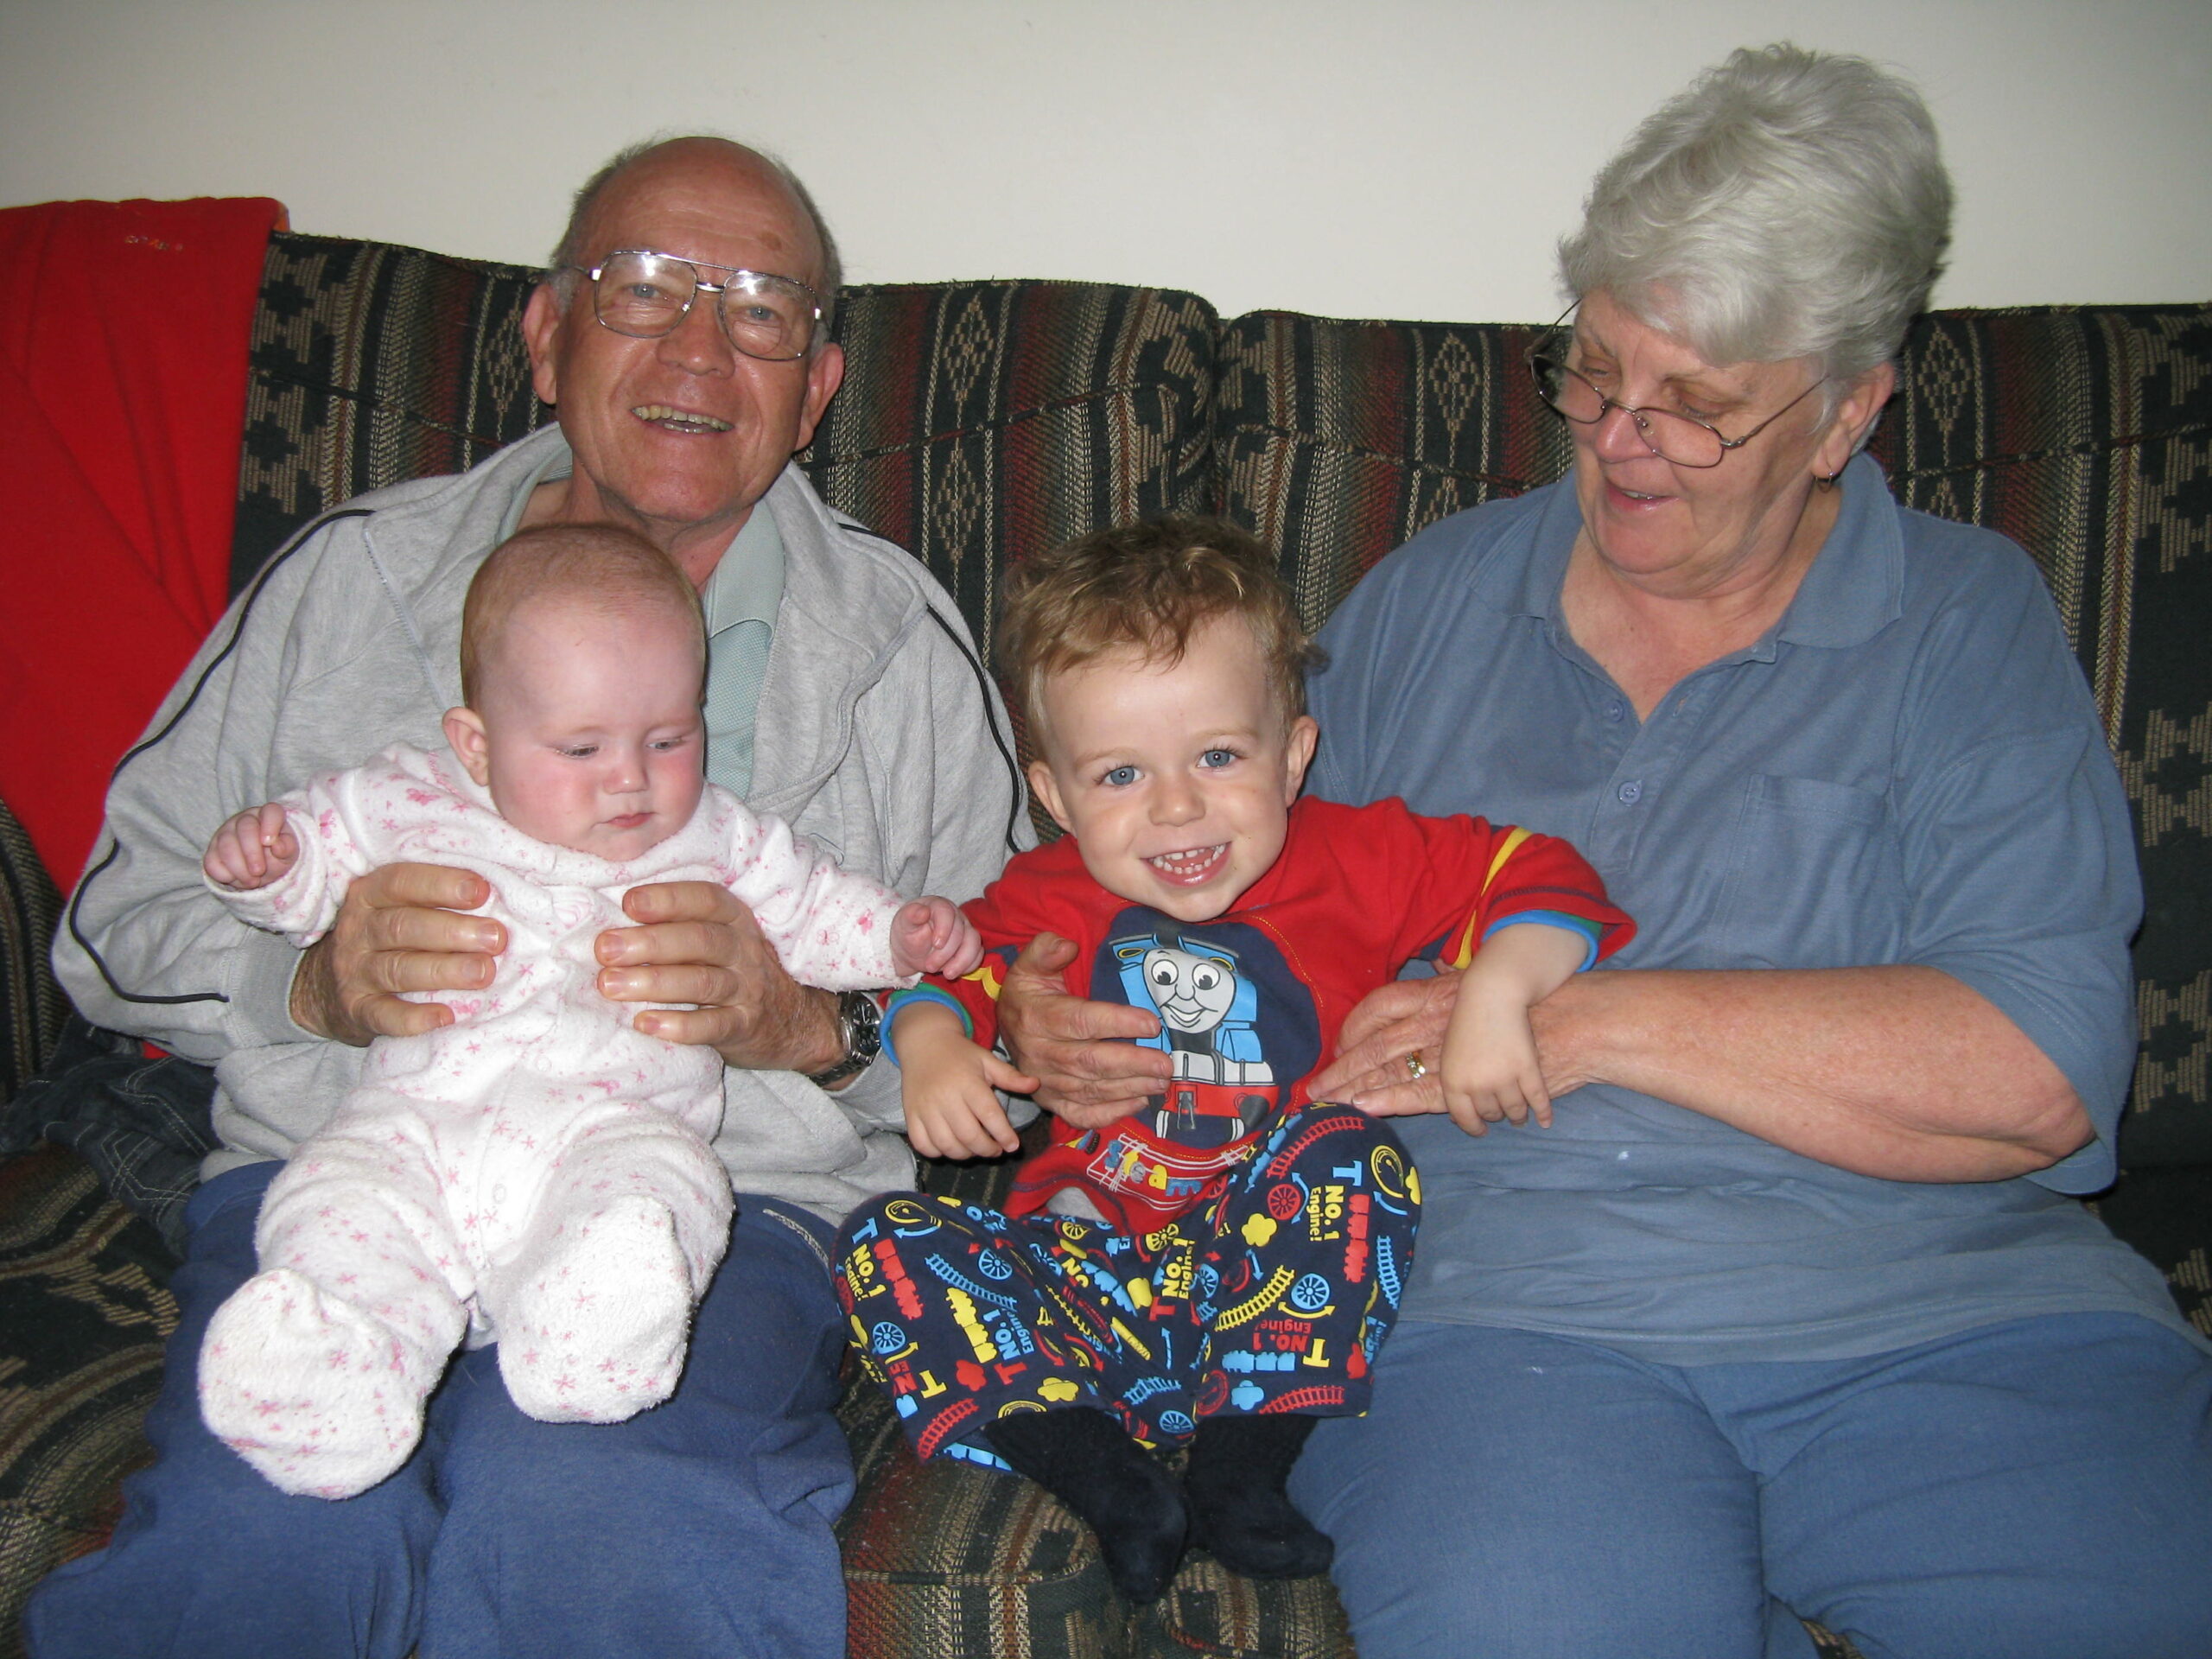 Two elderly people hold their young grandchildren sitting on a sofa.